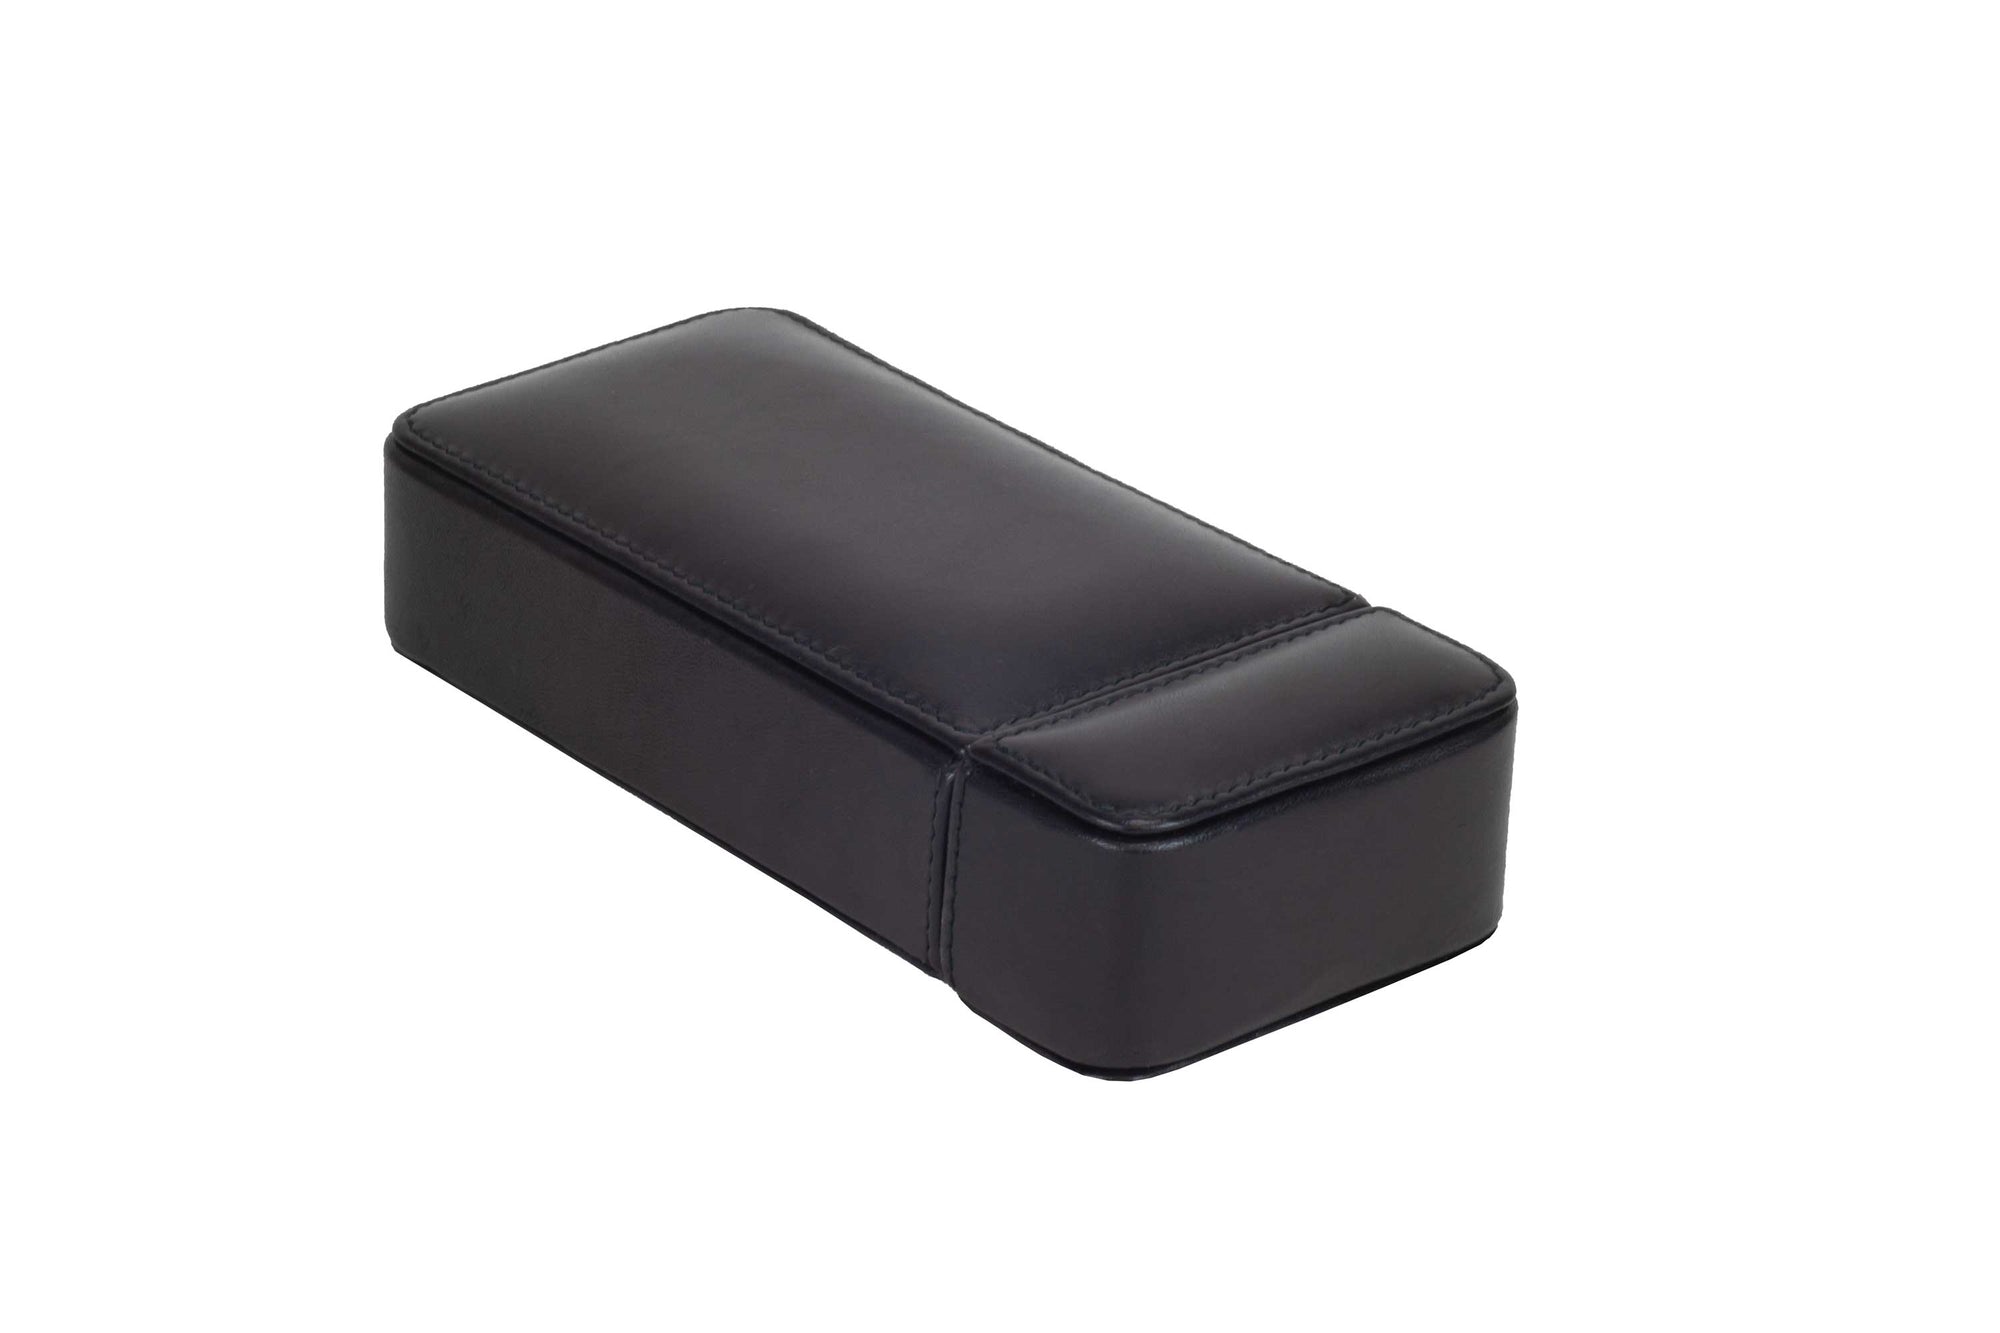 DiLoro Italian Leather Single Travel Watch Case Holder in Black Made in Italy - Closed